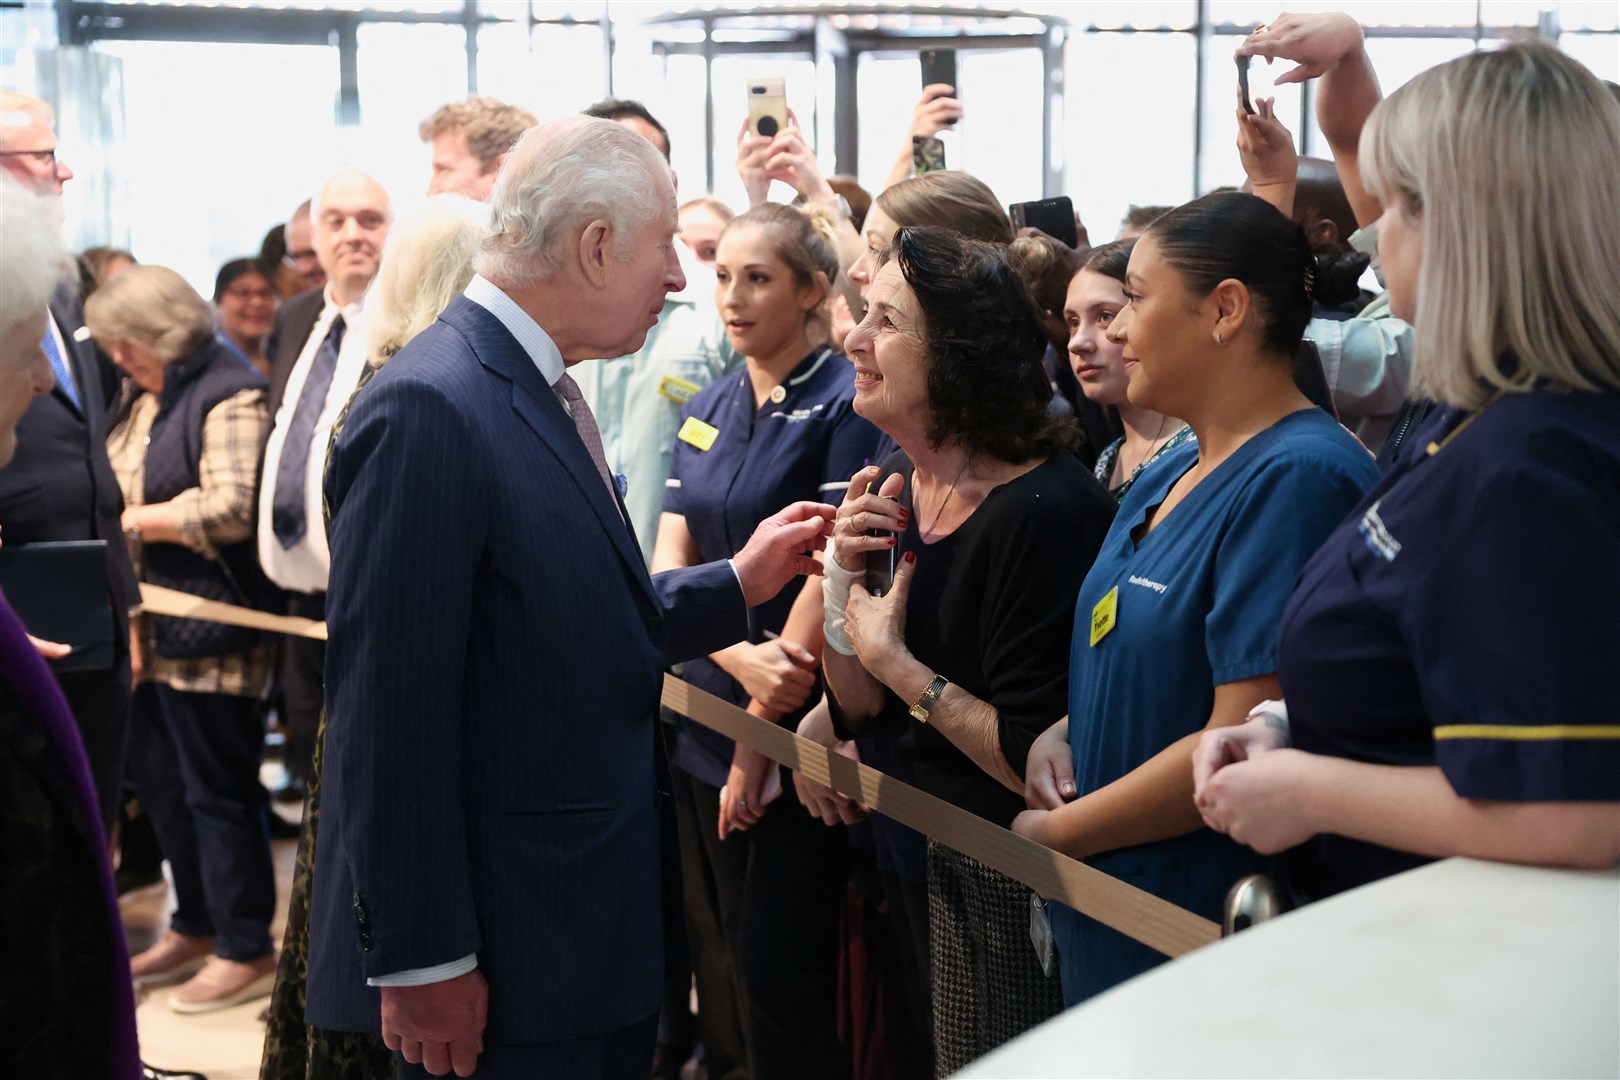 Charles meets staff members at the University College Hospital Macmillan Cancer Centre (Suzanne Plunkett/PA)